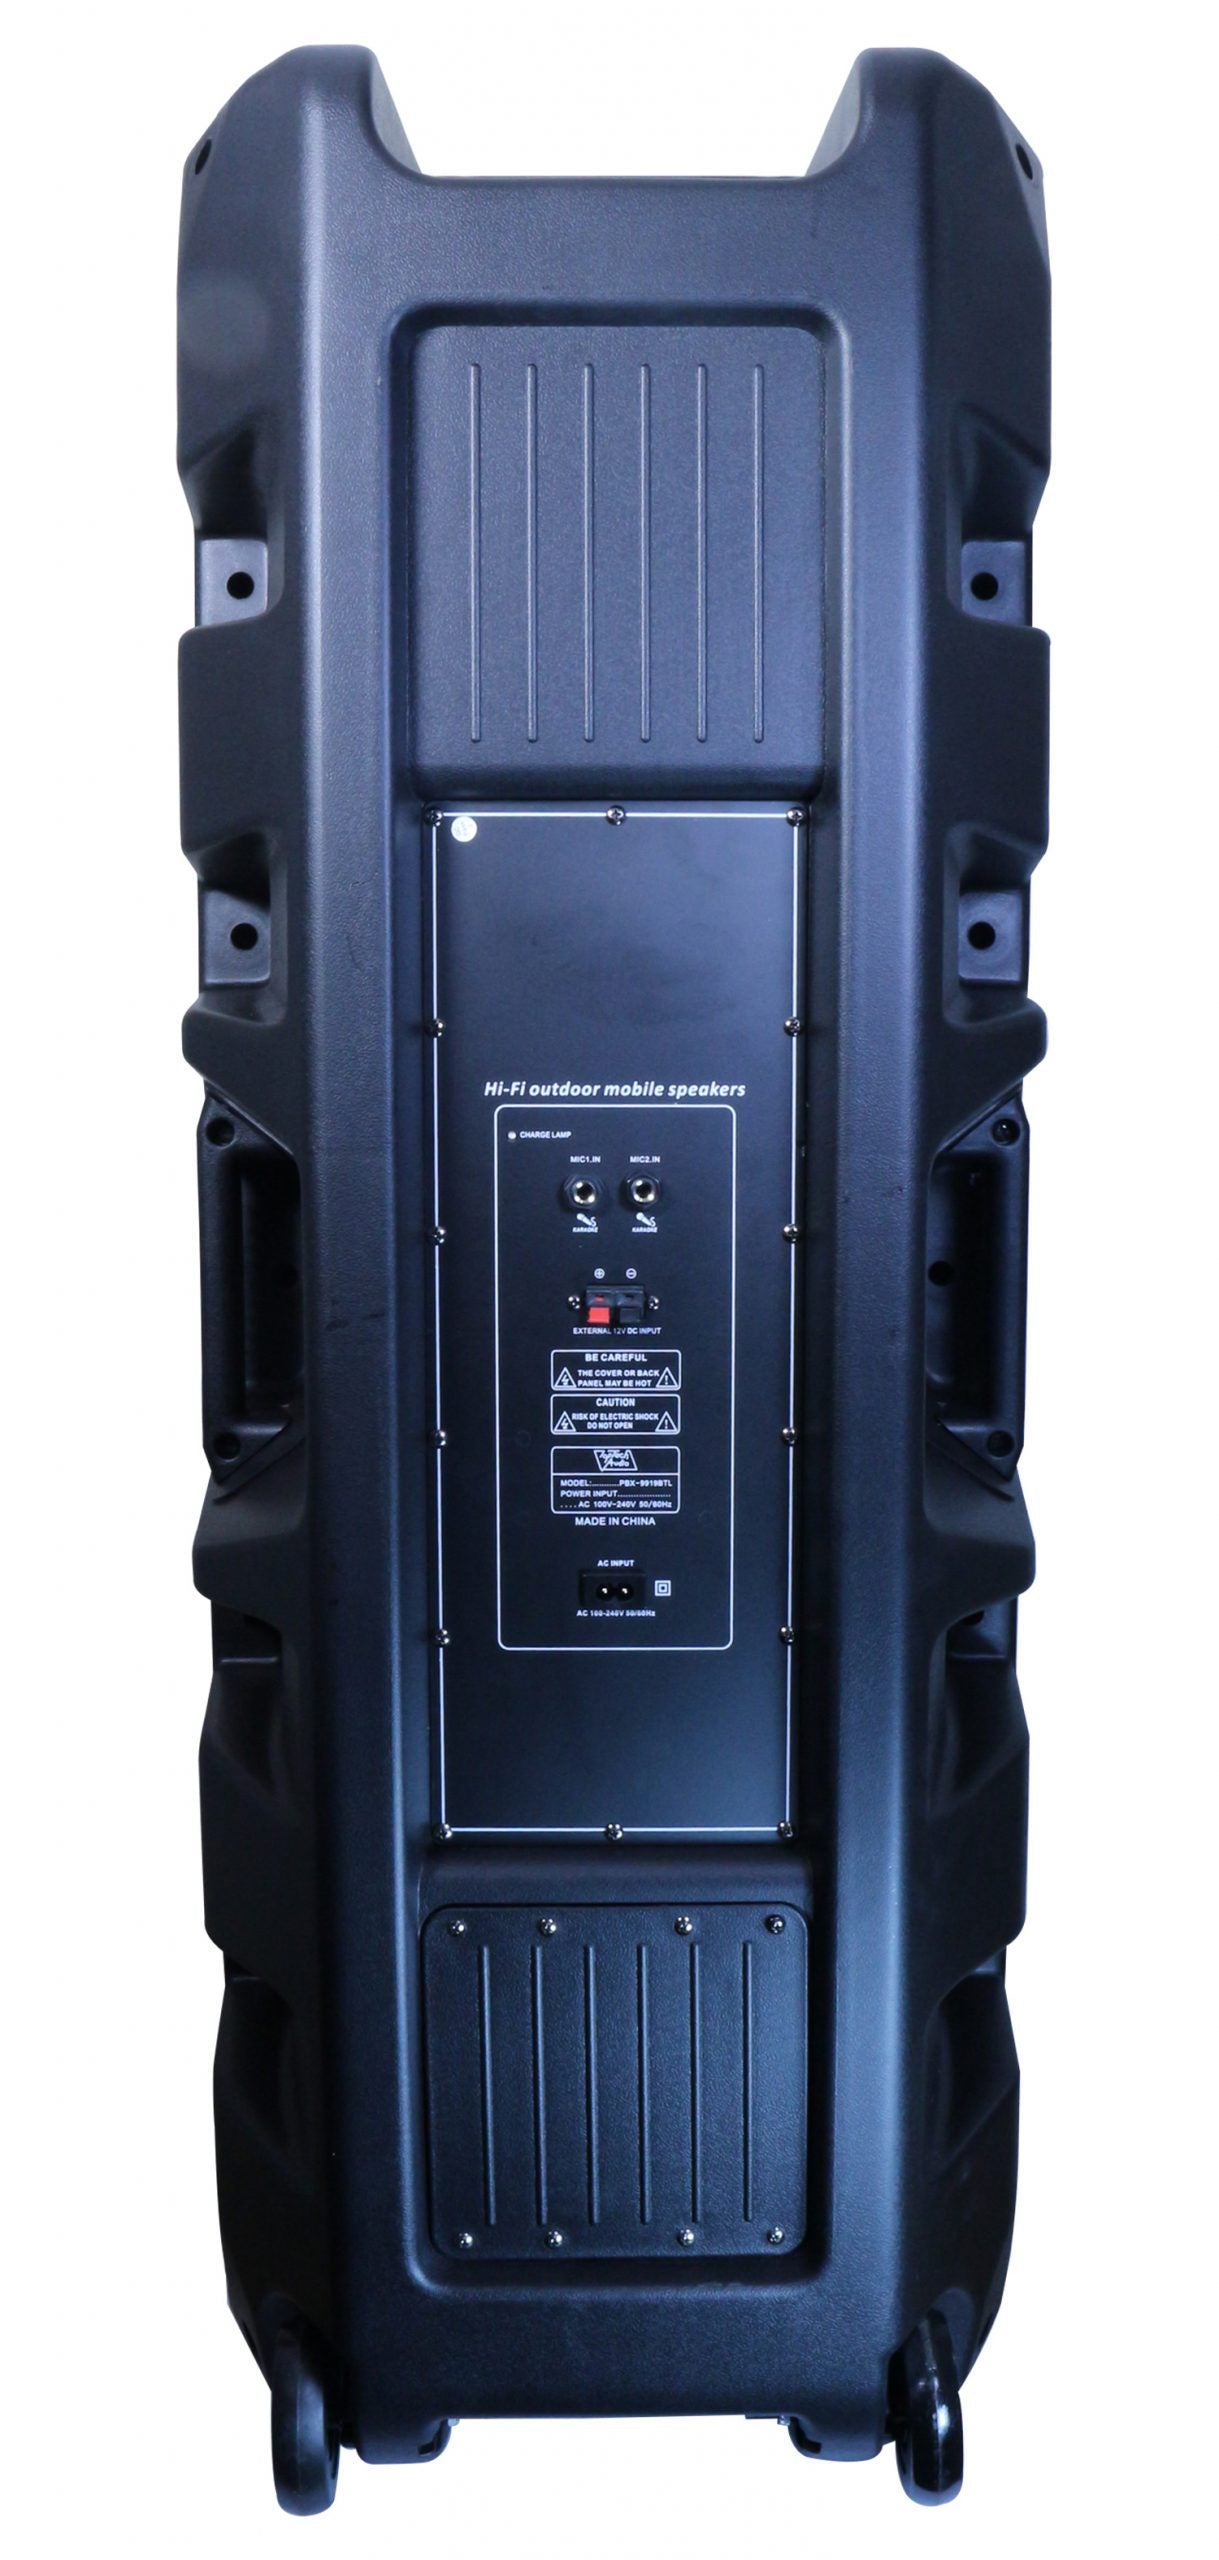 Fully Amplified Portable 5000 Watts Peak Power 2 x 15” Speaker WITH LED LIGHT